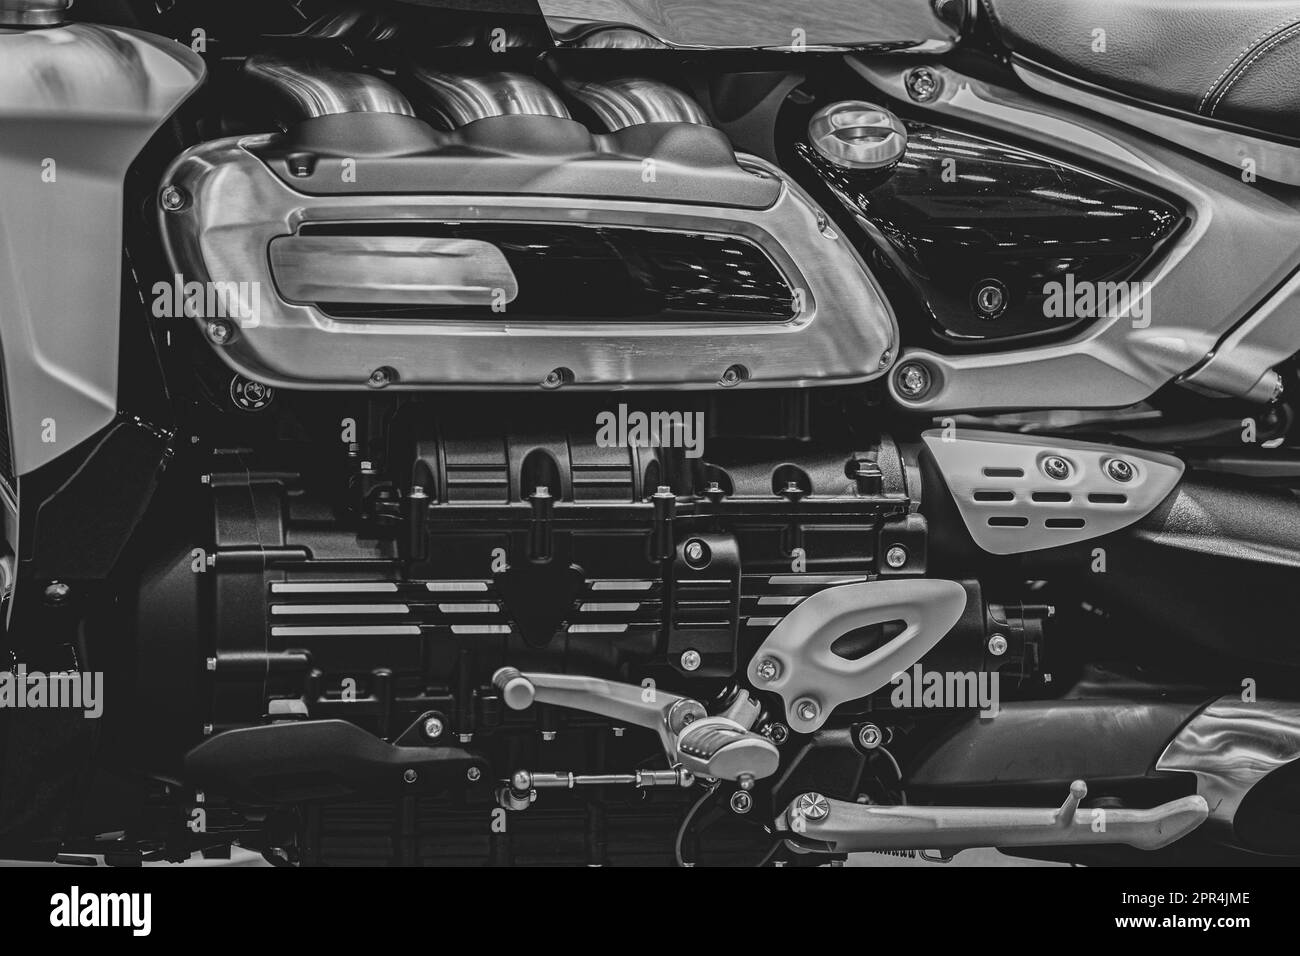 Closeup Motorcycle engine superbike chopper boxster engine art in black and white vintage photography Stock Photo